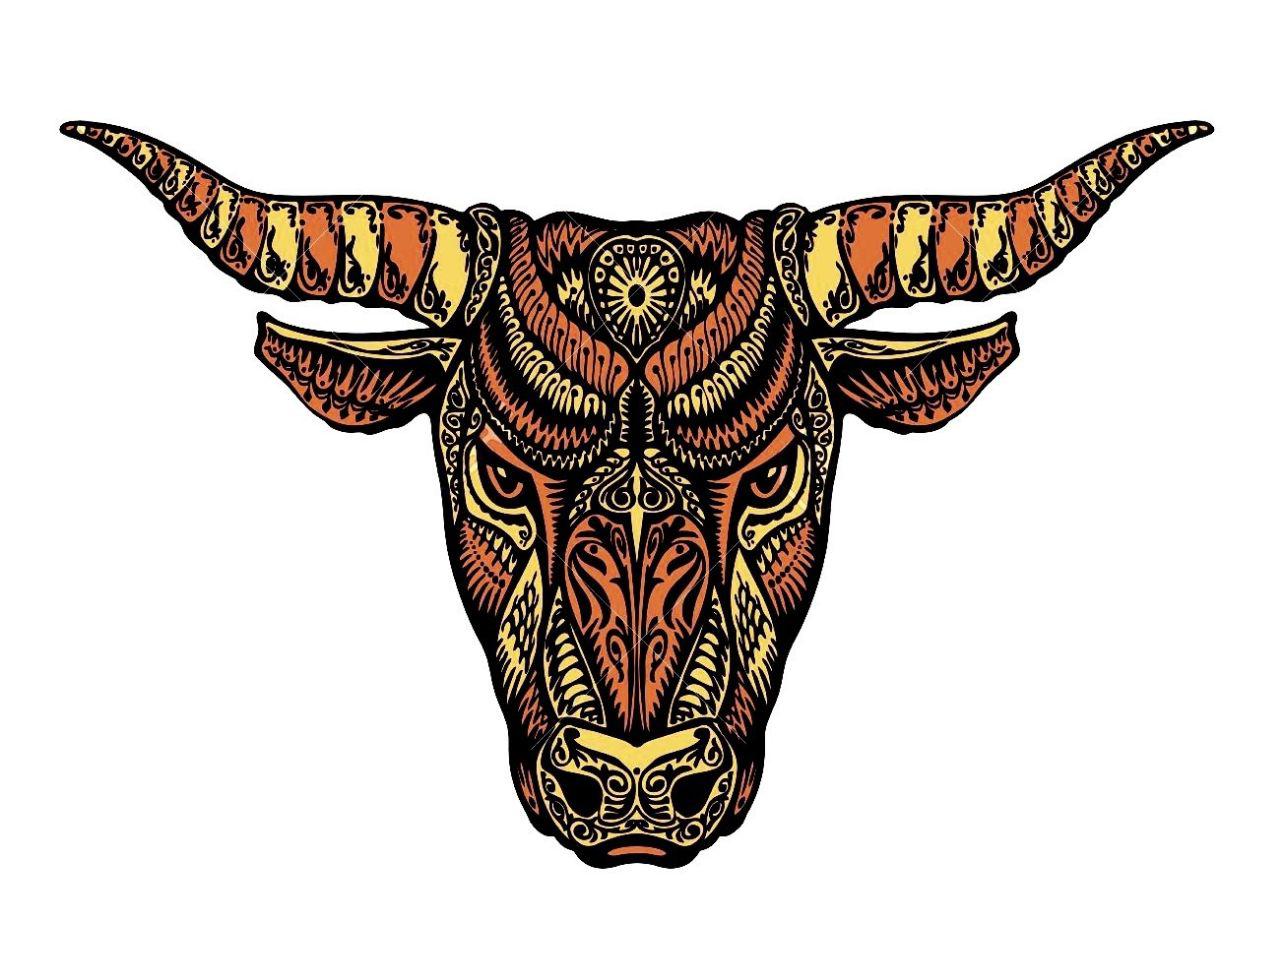 General 1280x980 simple background white background bull